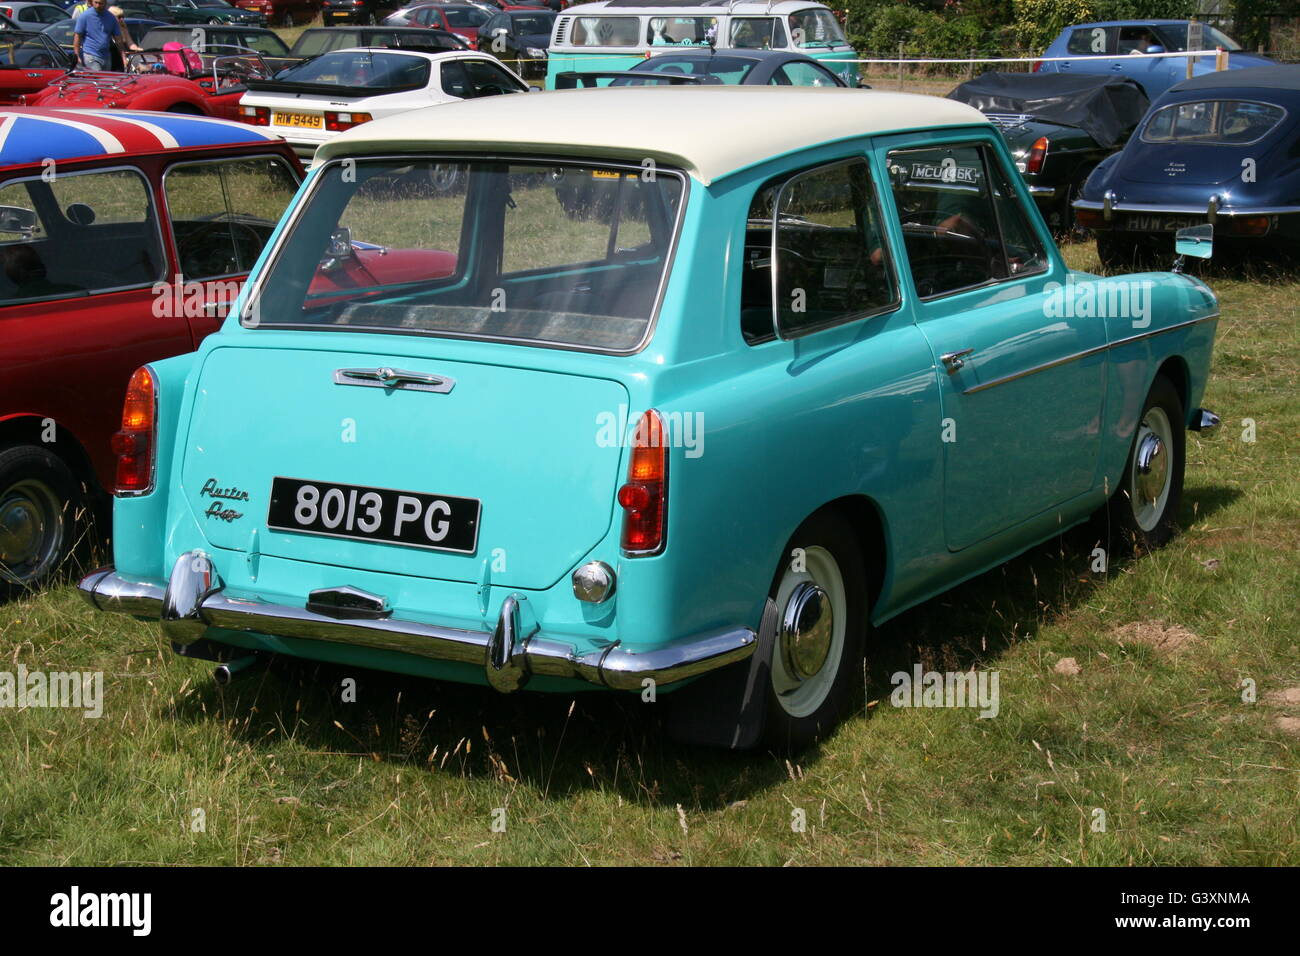 A REAR OFFSIDE VIEW OF AN AUSTIN A40 FARINA CAR AT A CLASSIC CAR SHOW Stock Photo